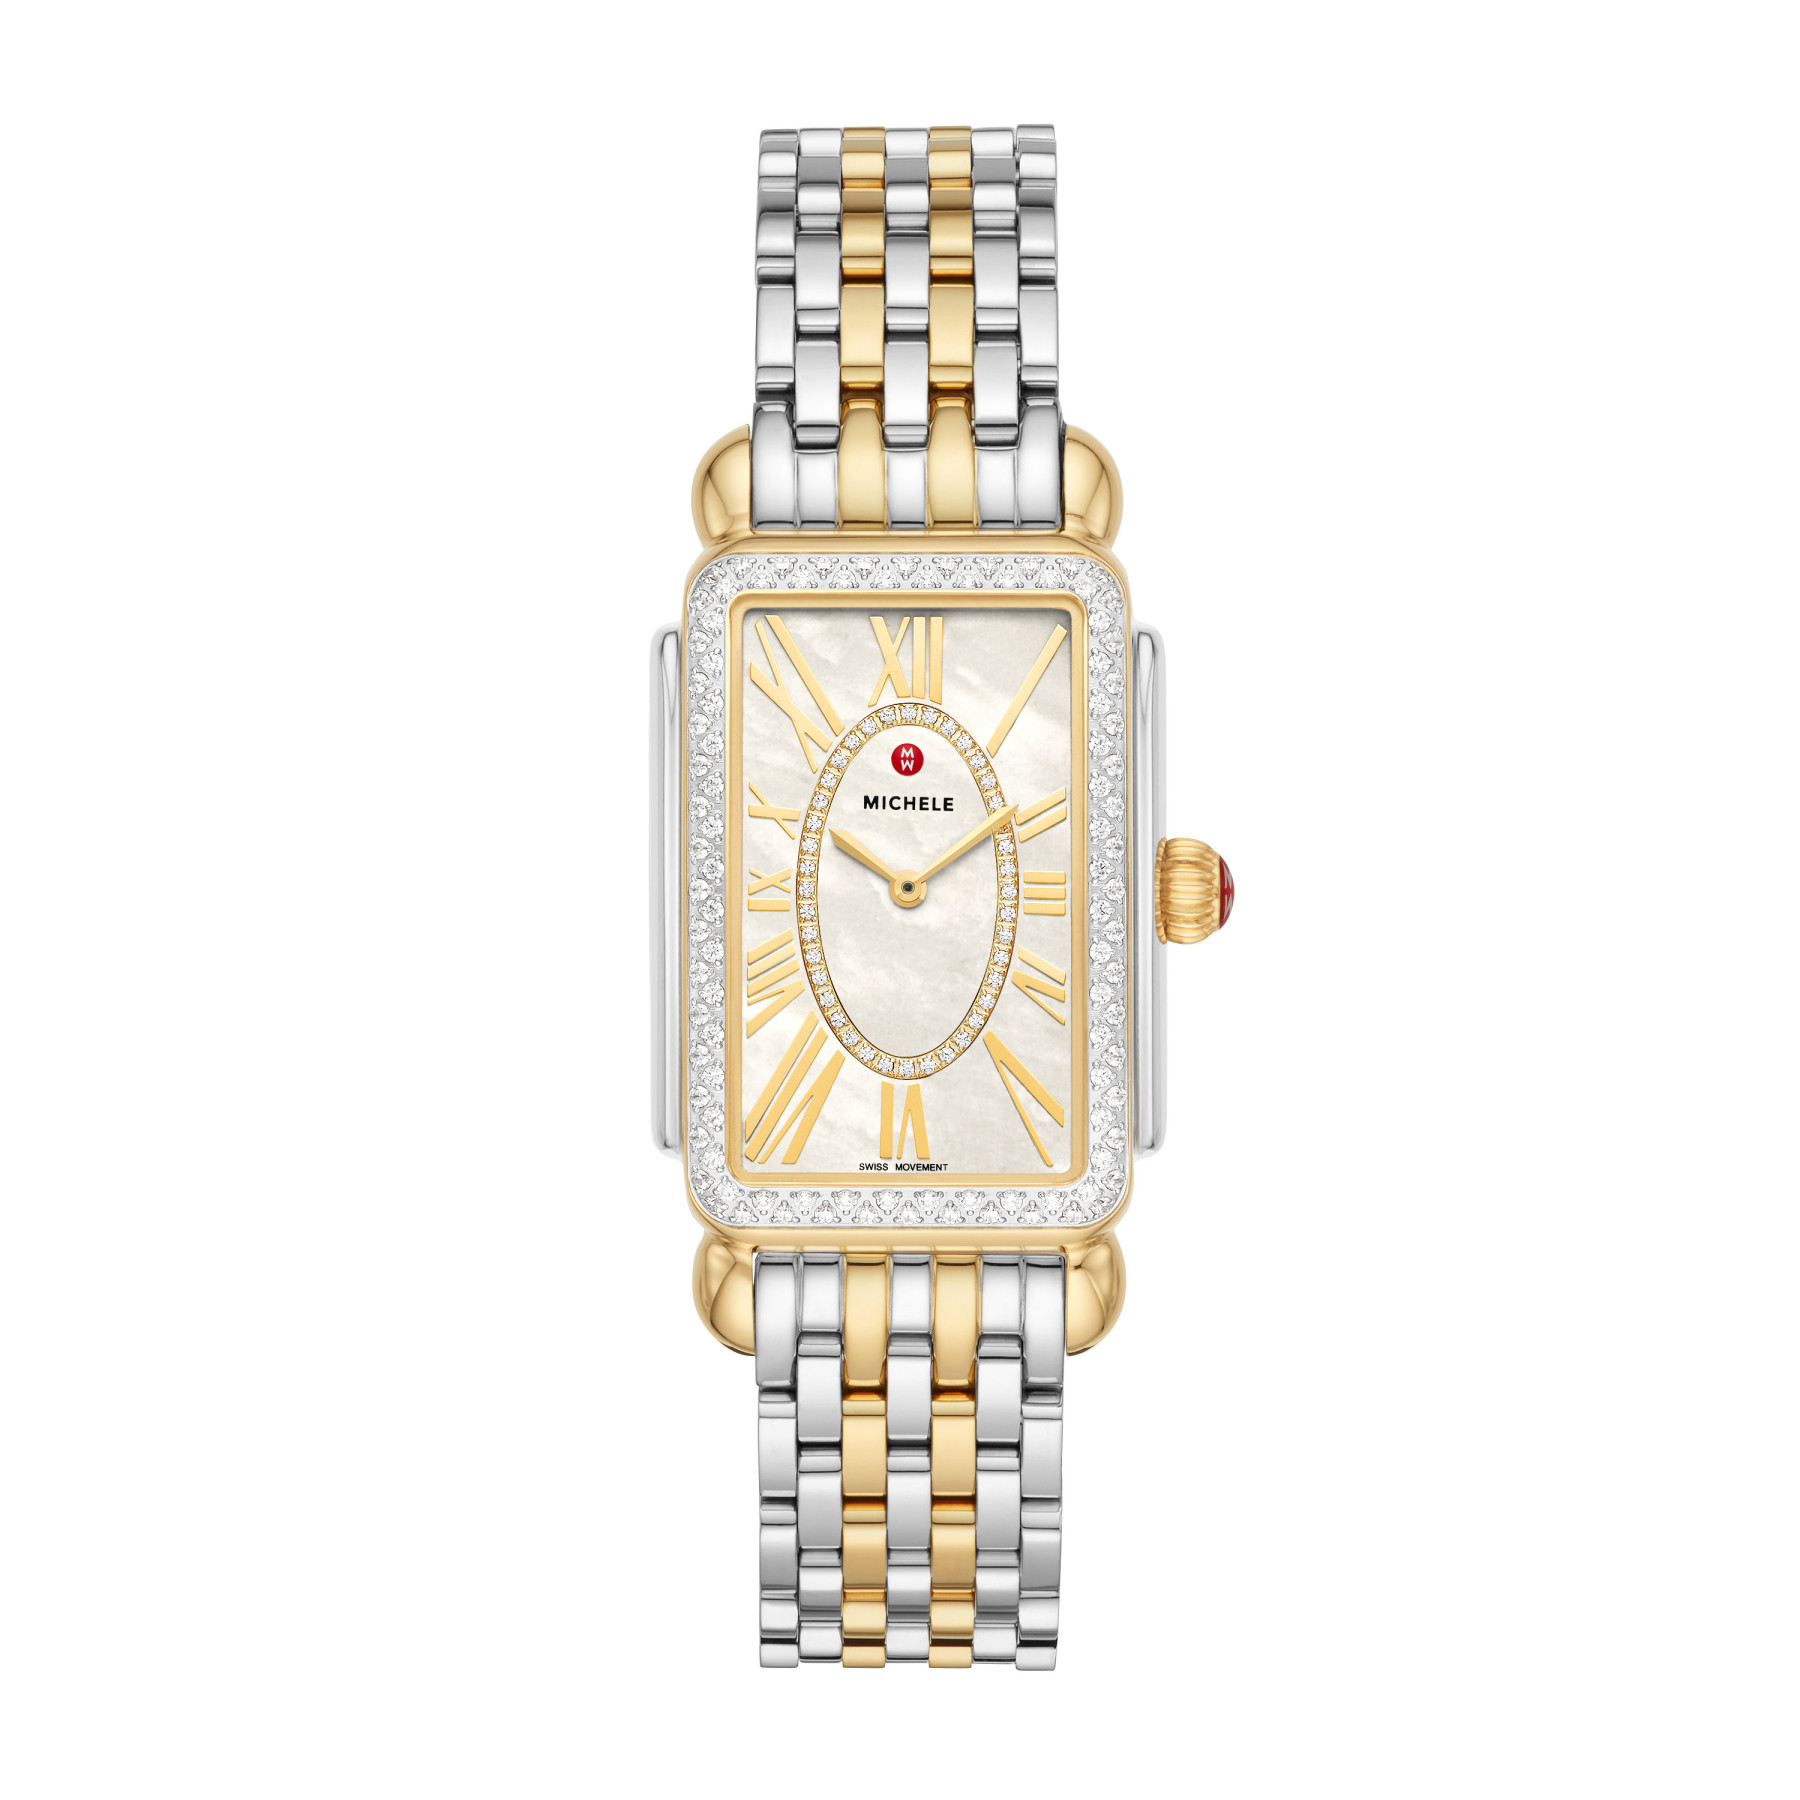 Michele Deco Park Gold and Steel Diamond Watch – 26.5mm front view